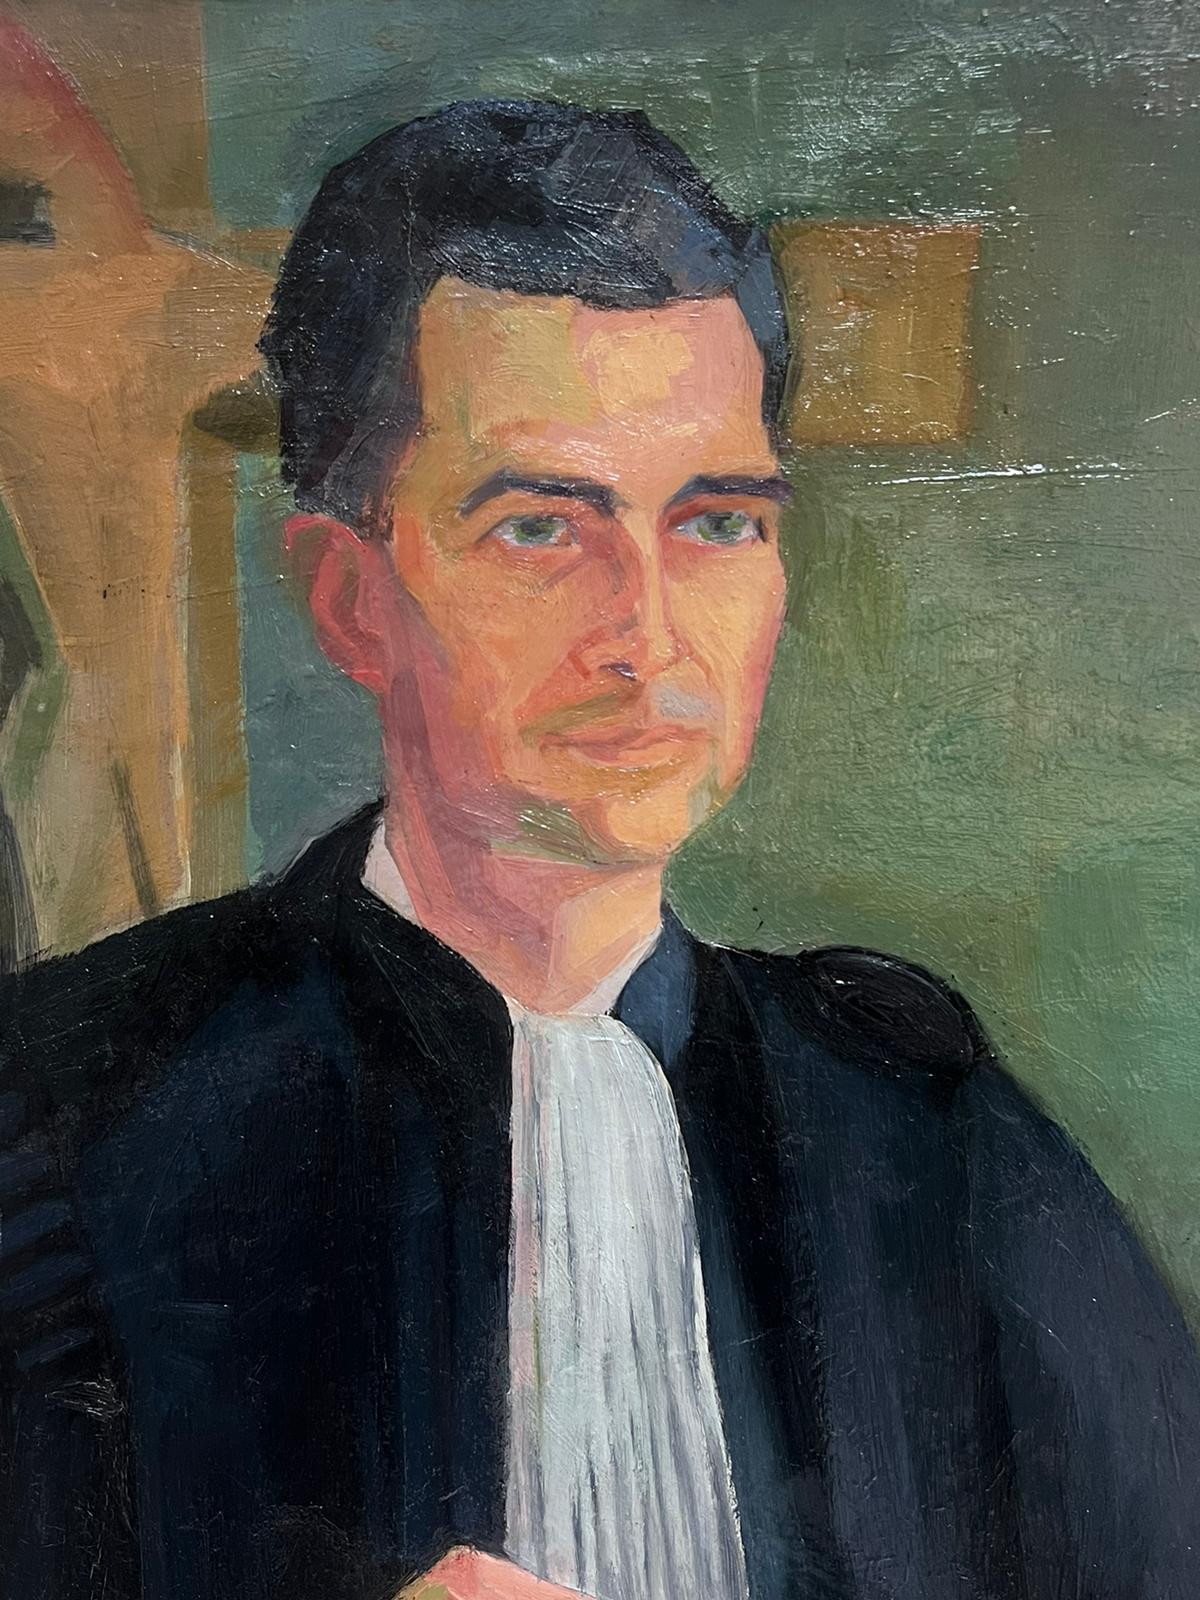 The French Priest
by Denise Dardel (French circa 1950)
signed lower front, dated 1950 verso
oil on canvas, unframed
canvas: 30 x 19.5 inches
provenance: private collection
condition: very good and sound condition